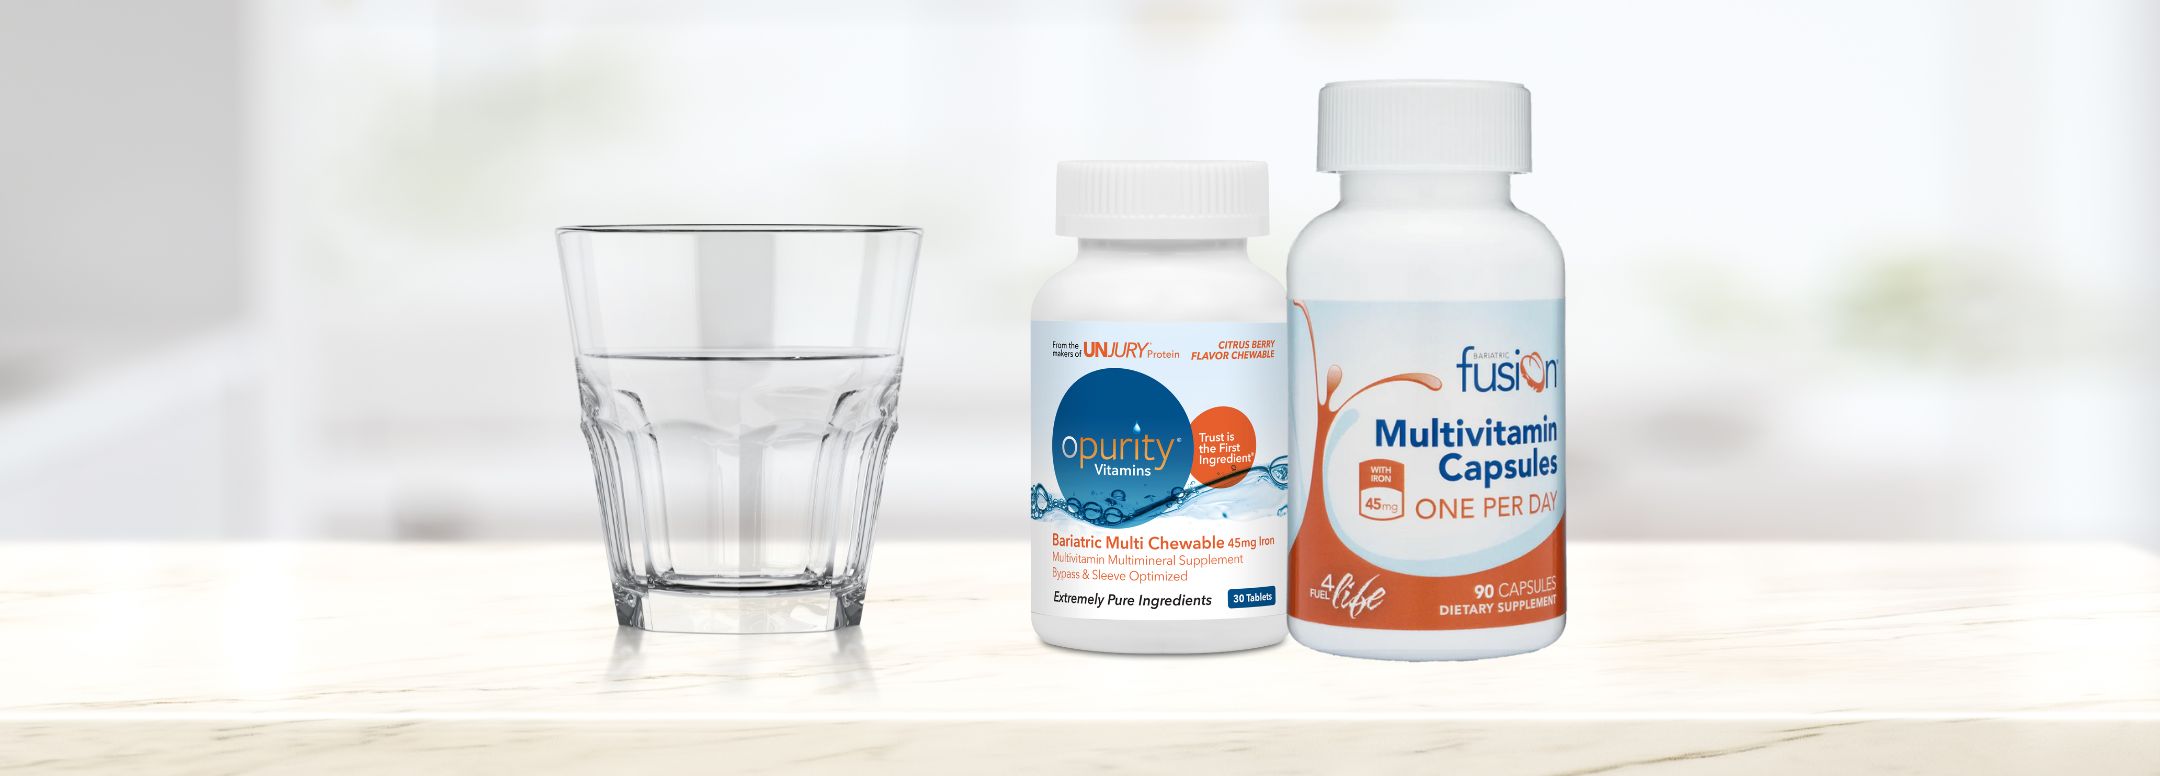 Unjury and Bariatric Fusion Vitamin Bottles with glass of water